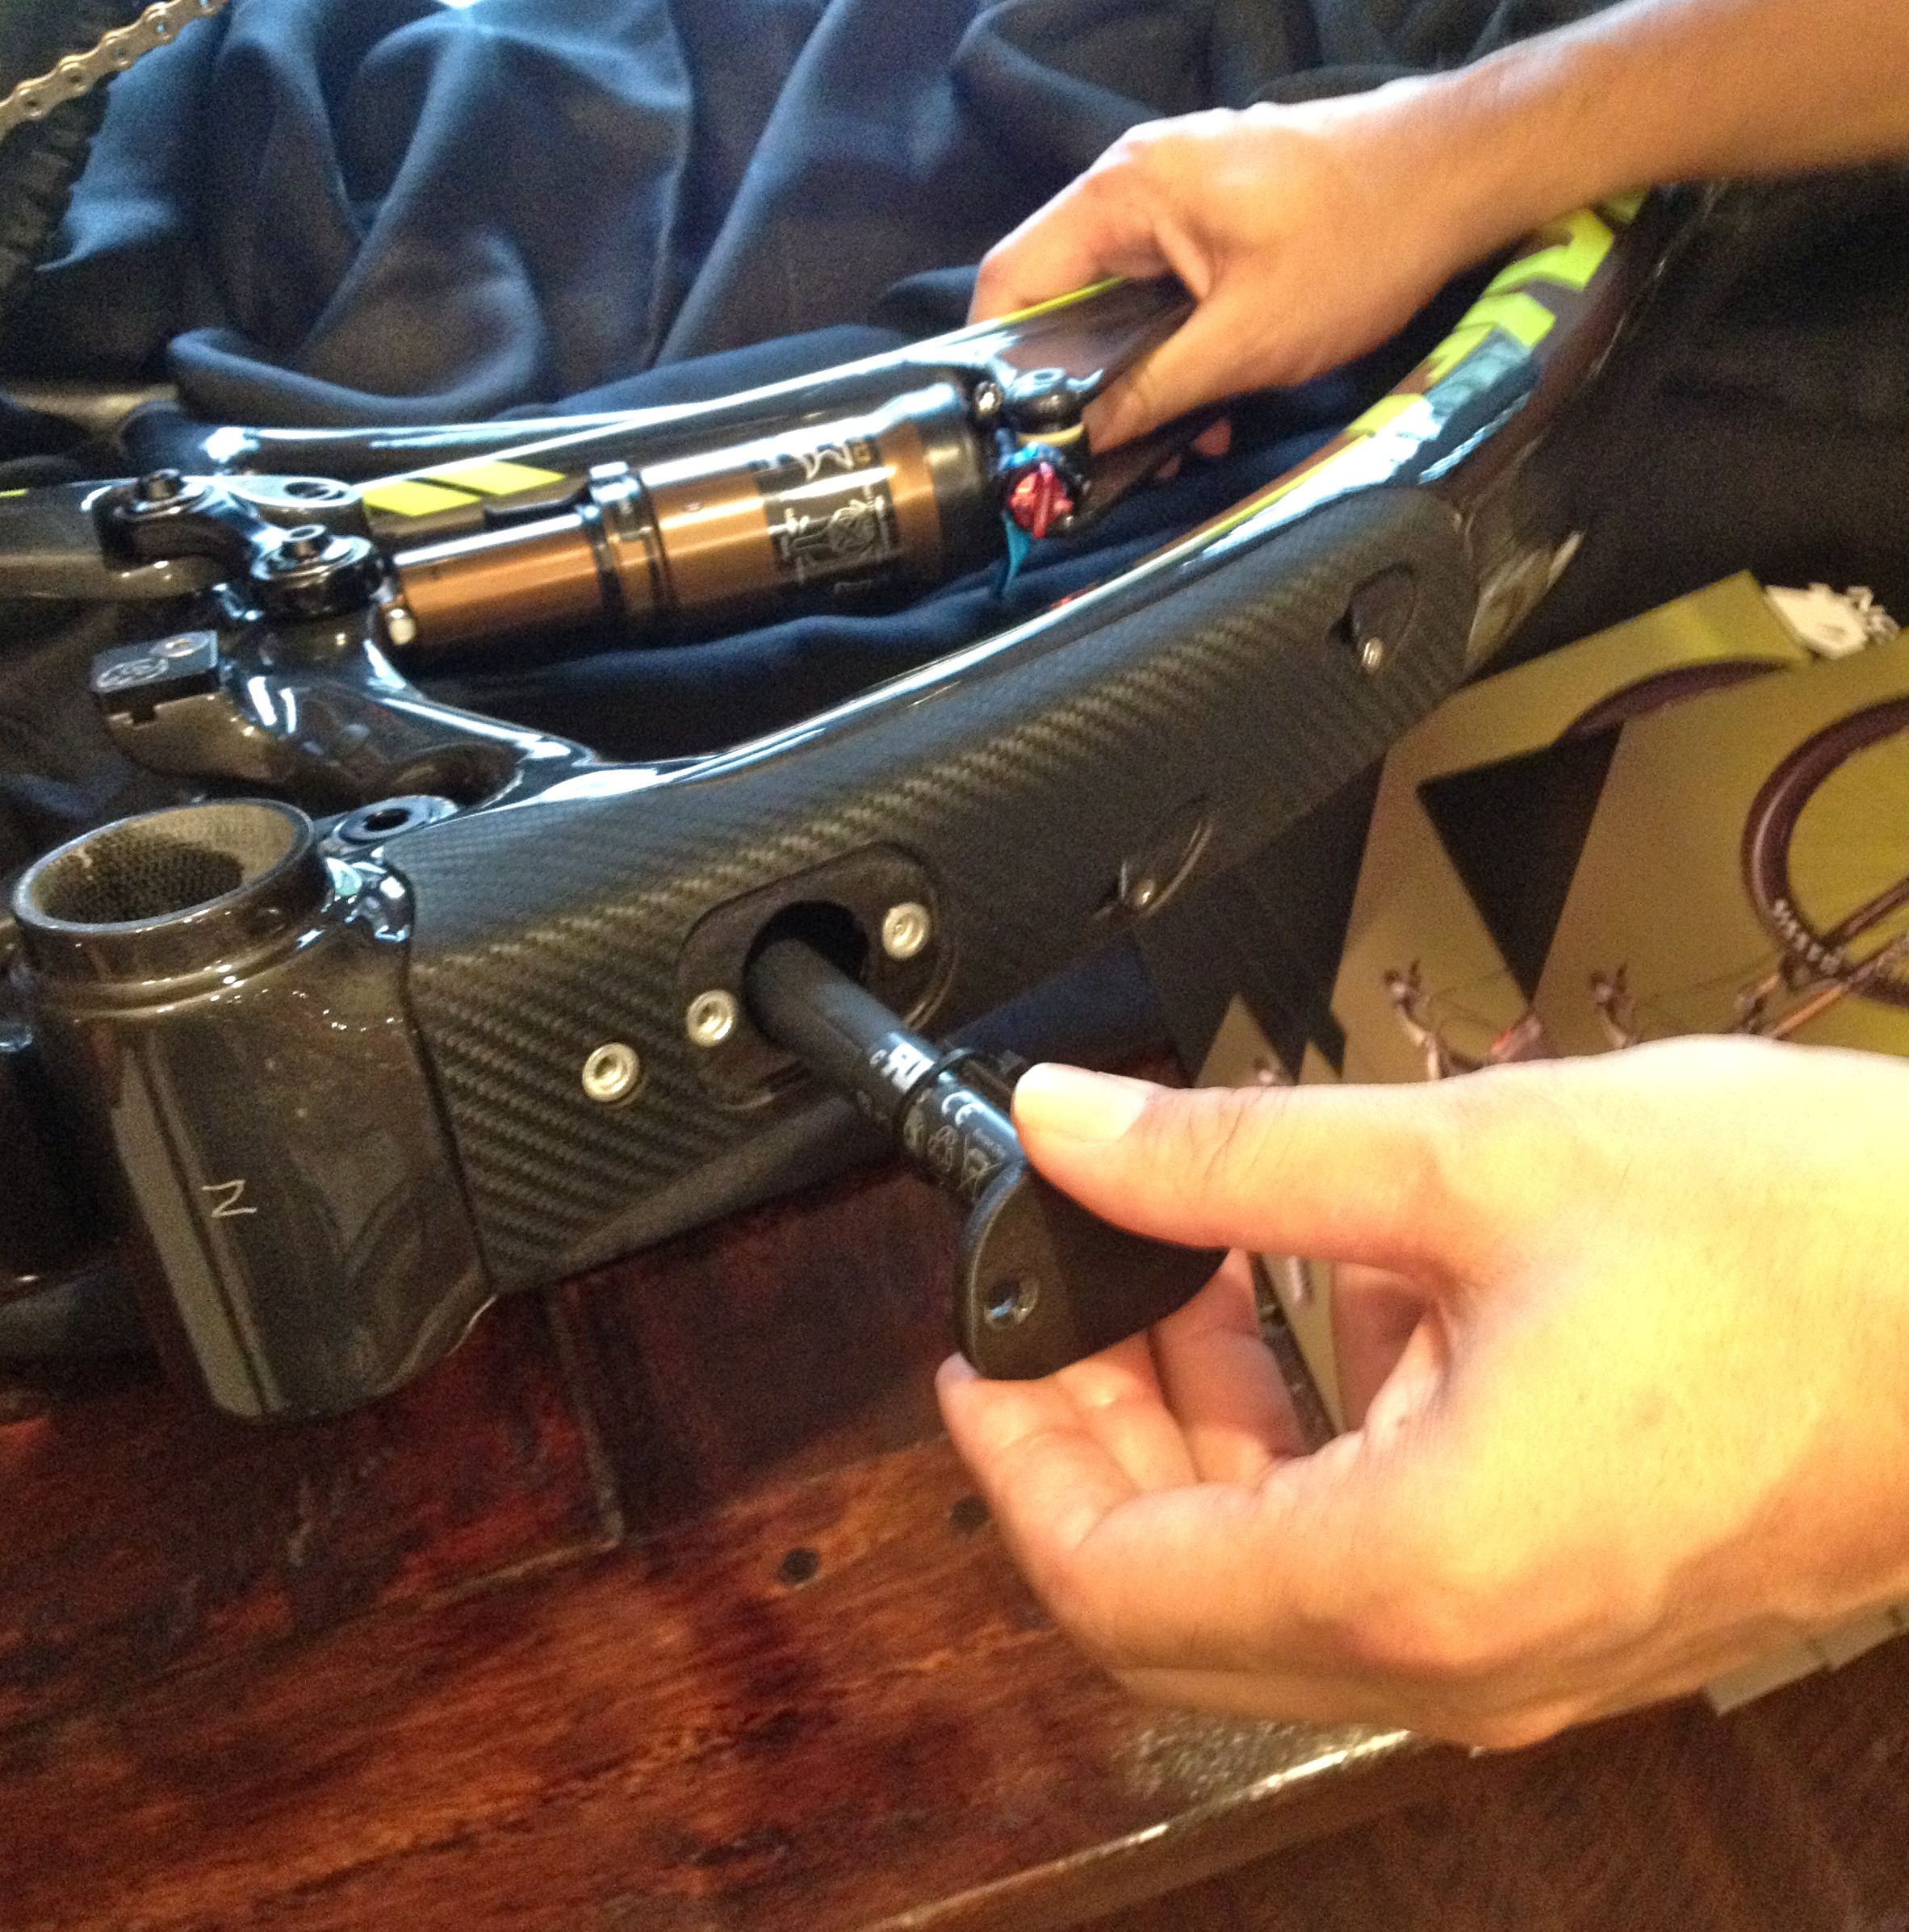 Pivot's Chris Cocalis demonstrates how to stow the Di2 battery inside the Mach 4's via the frame's downtube port. 